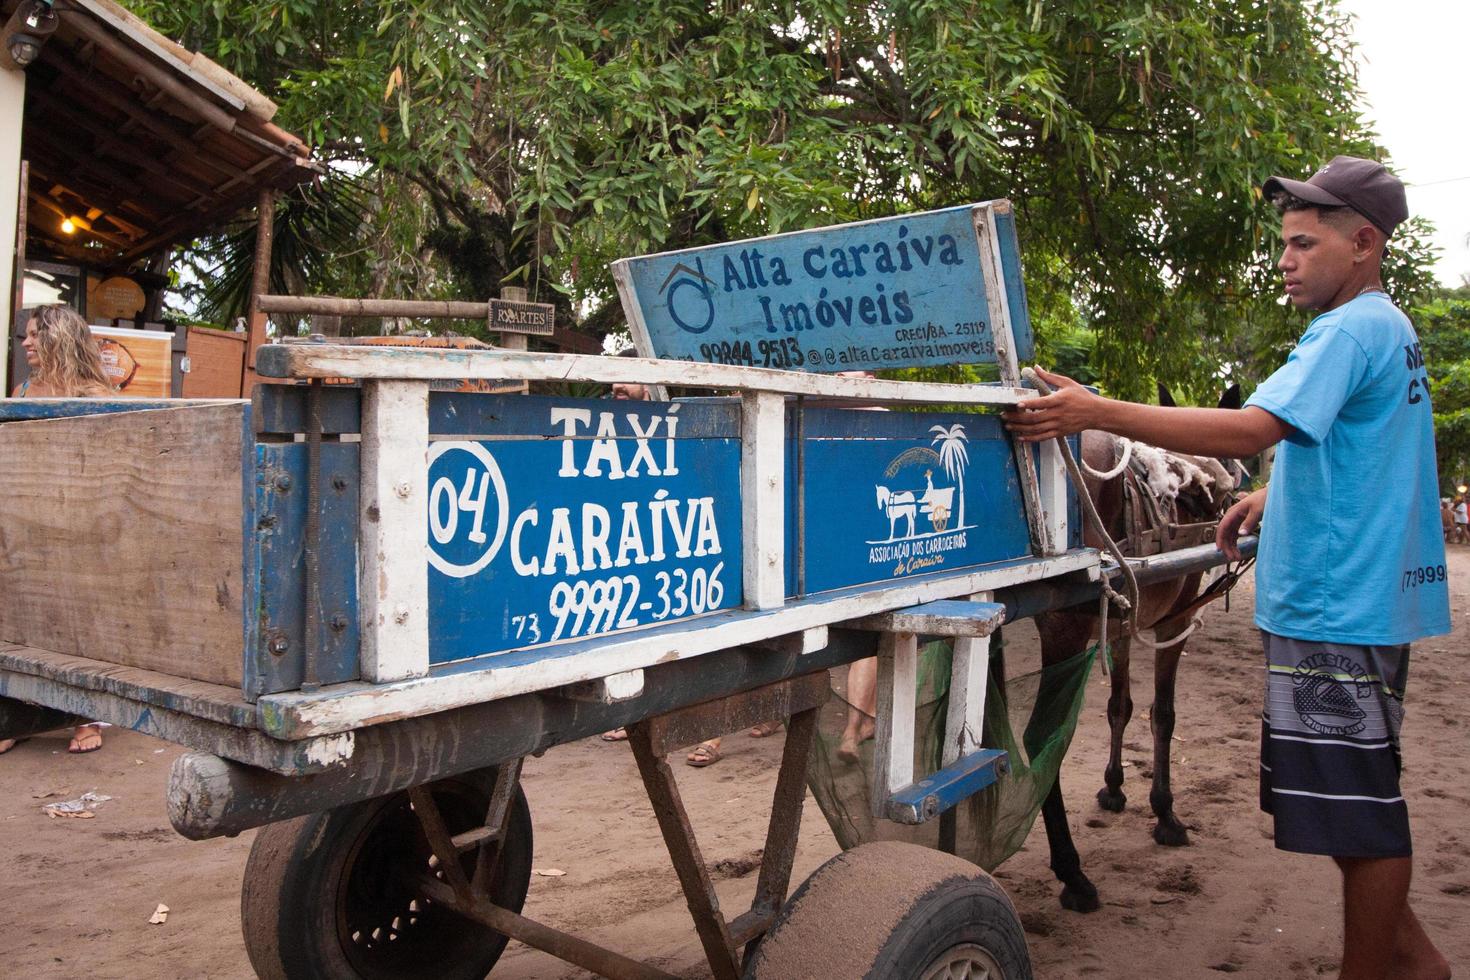 Caraiva, Bahia, Brazil, March 6 2022 Local Horse Drawn Taxi Service in the Village of Caraiva. For Suitcases only no Passengers Allowed photo